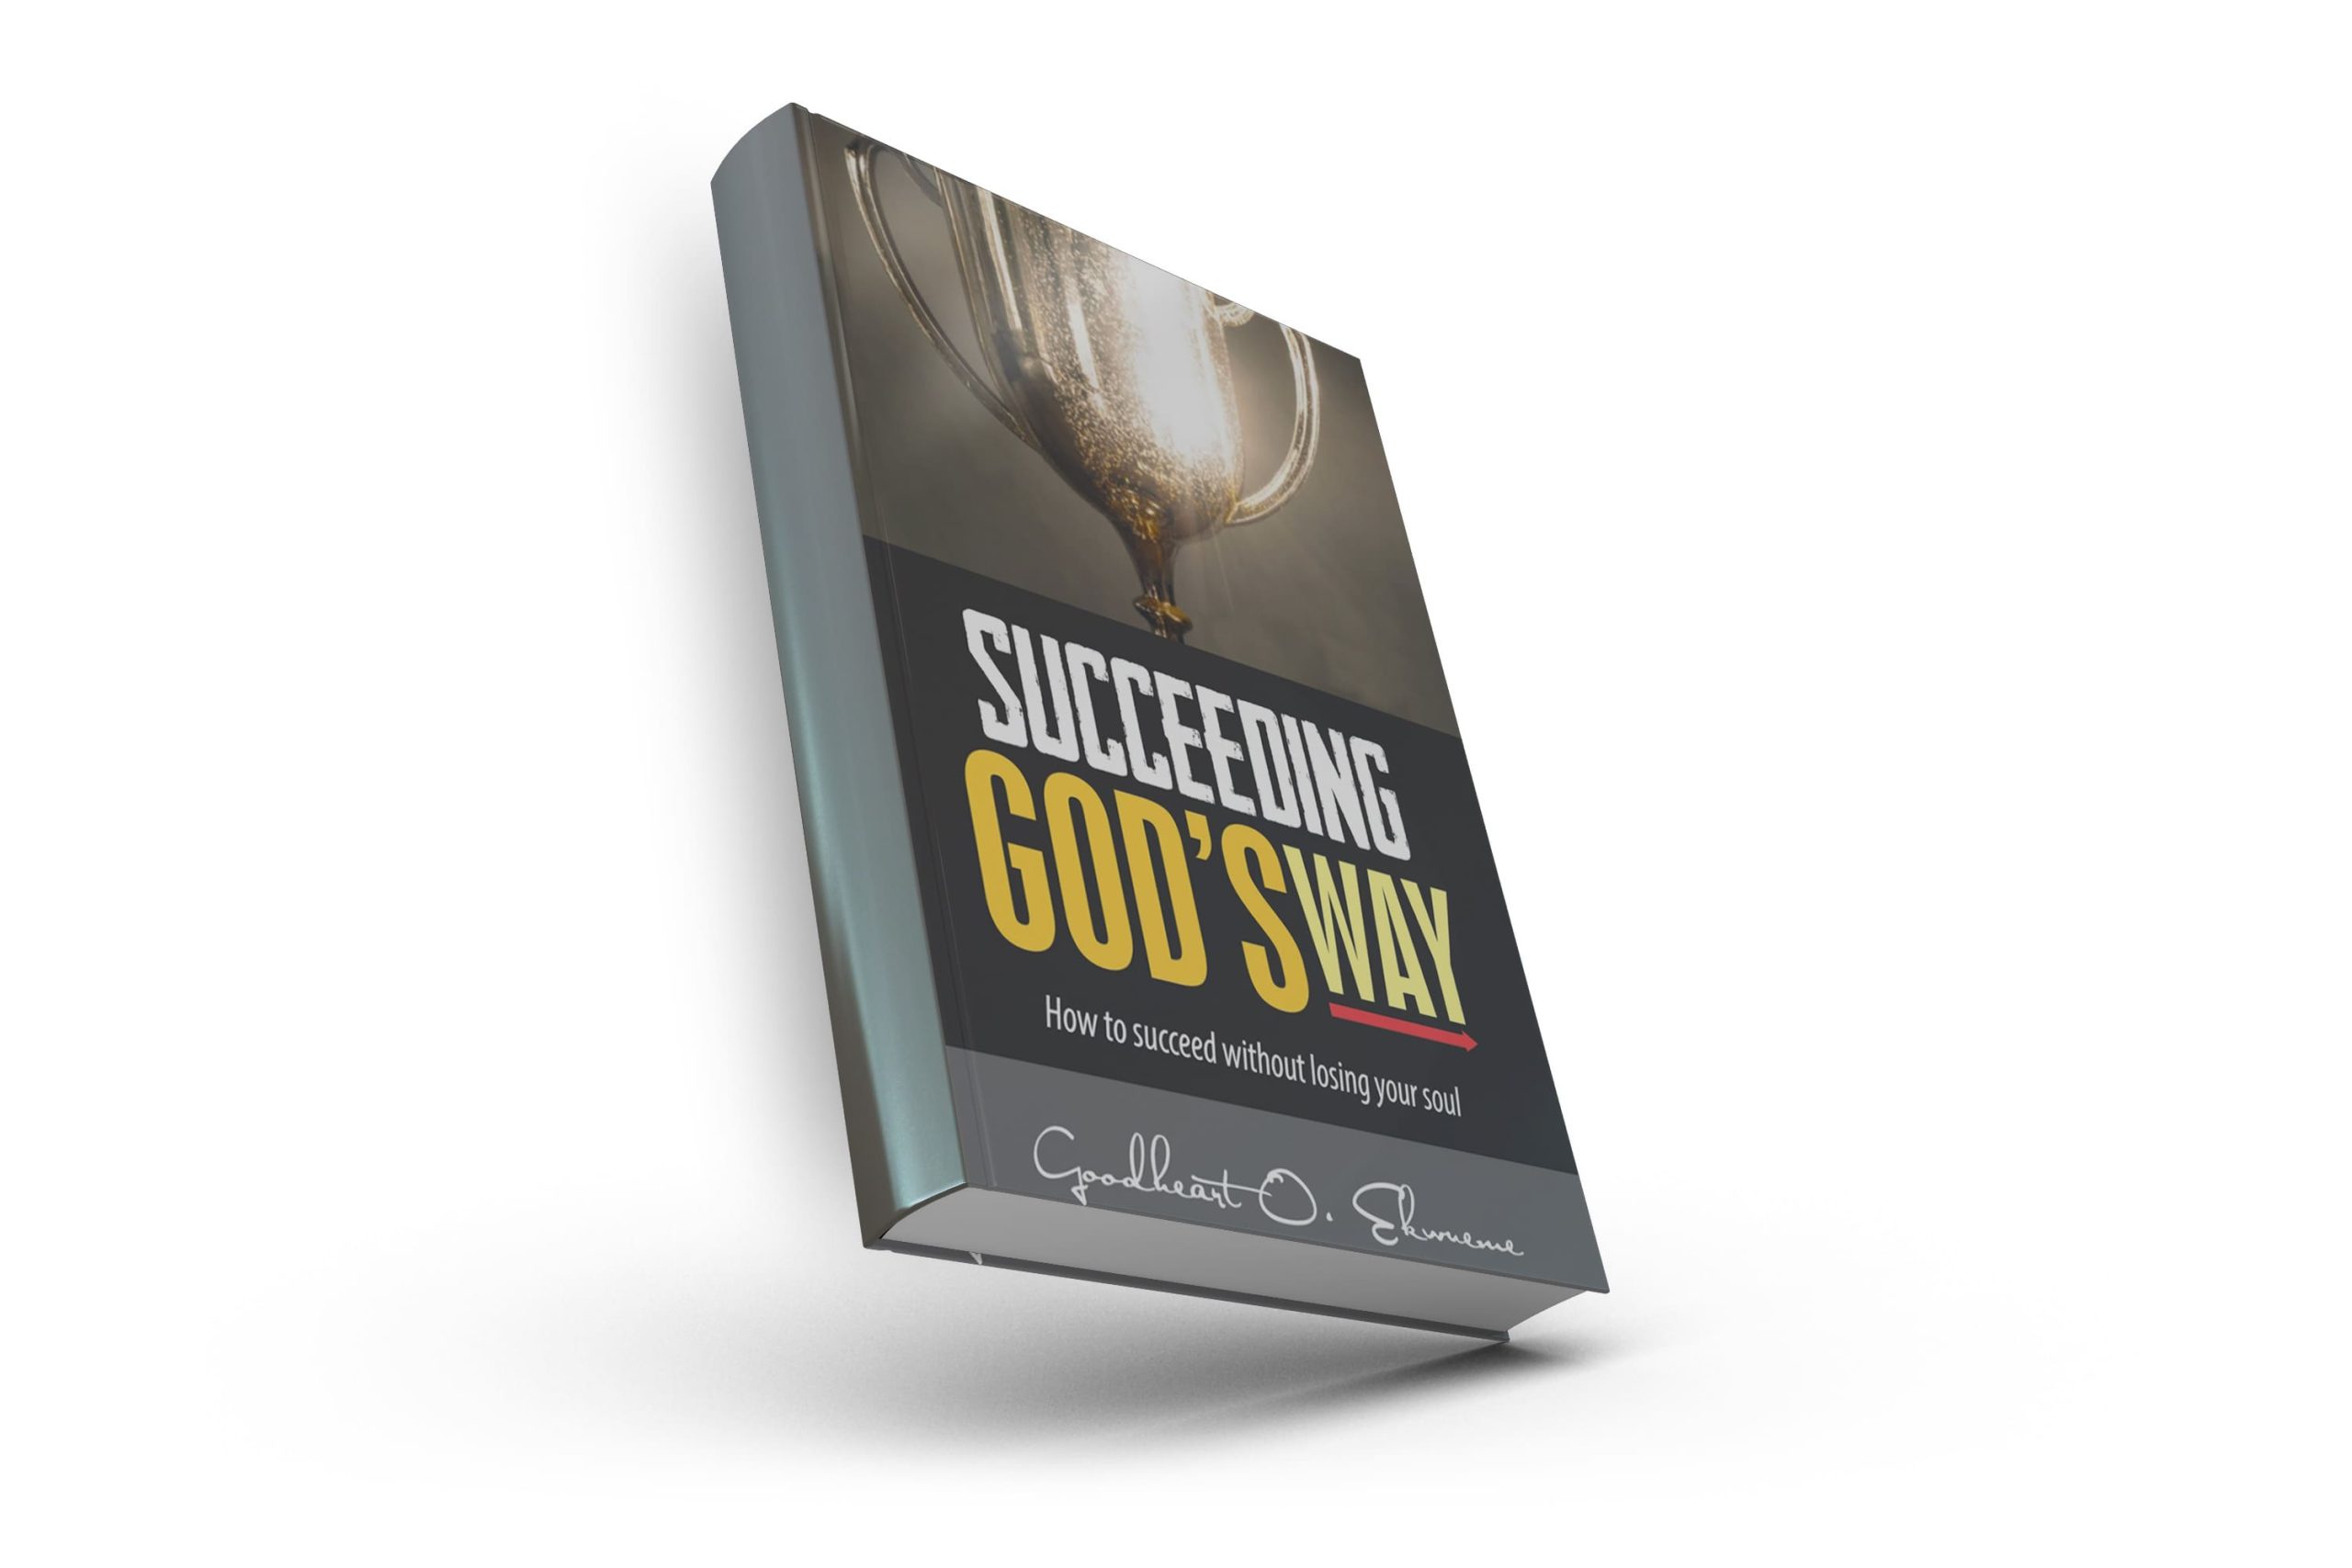 Succeeding God's Way - how to succeed without losing your soul